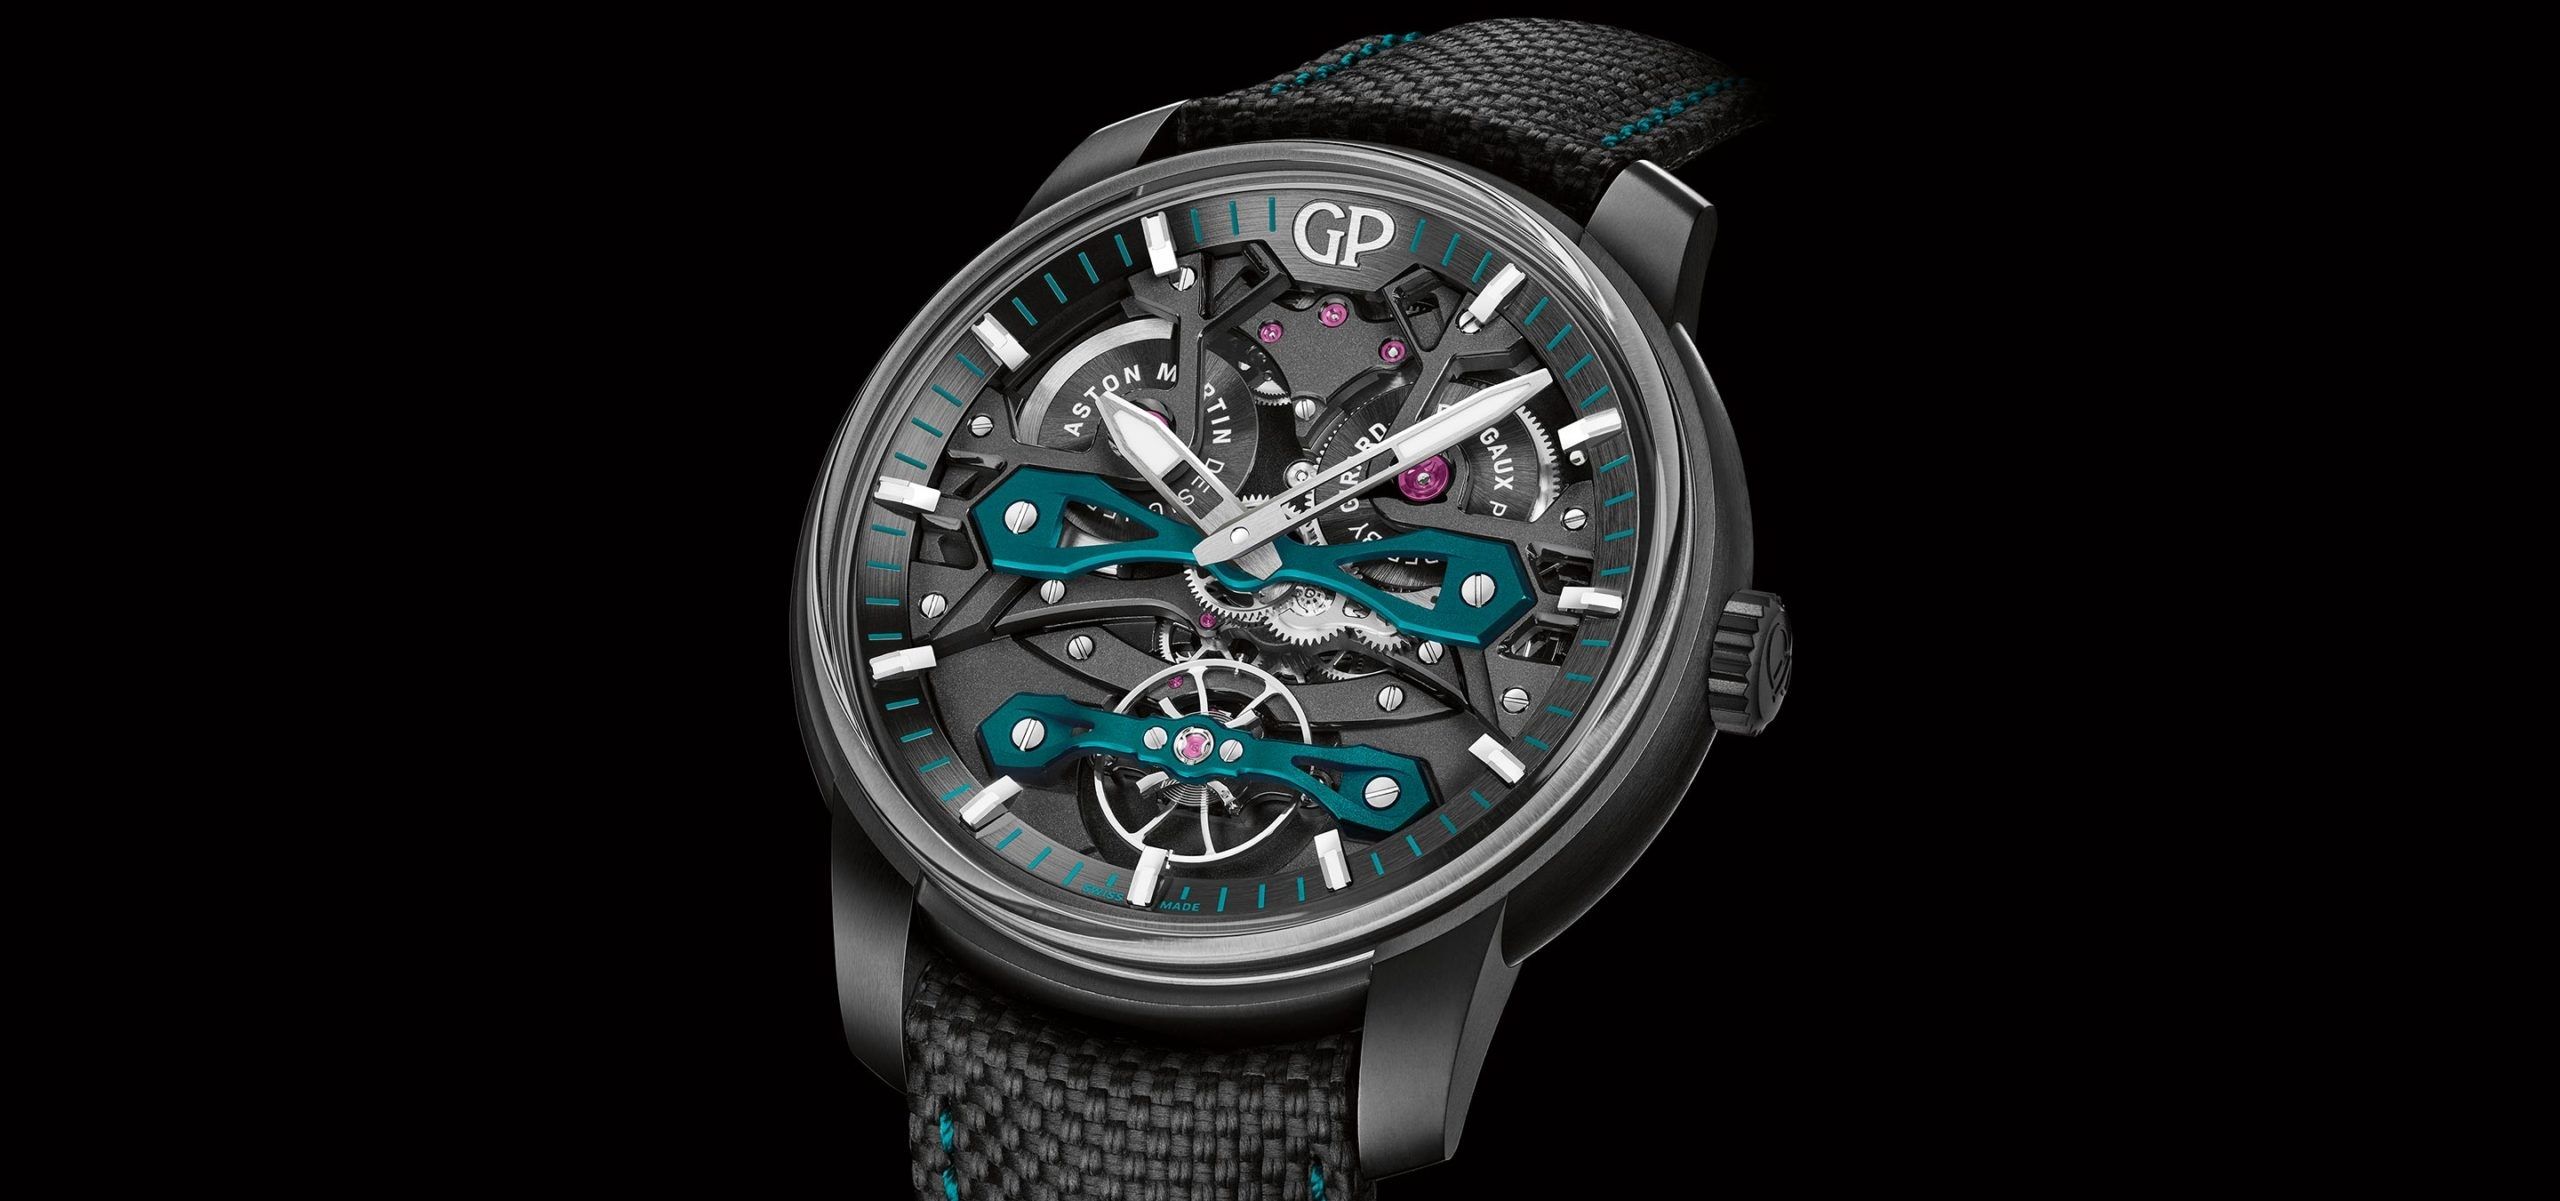 Revving Up The Gears Of Time: Latest In Their Collaboration Is The Girard-Perregaux Neo Bridges Aston Martin